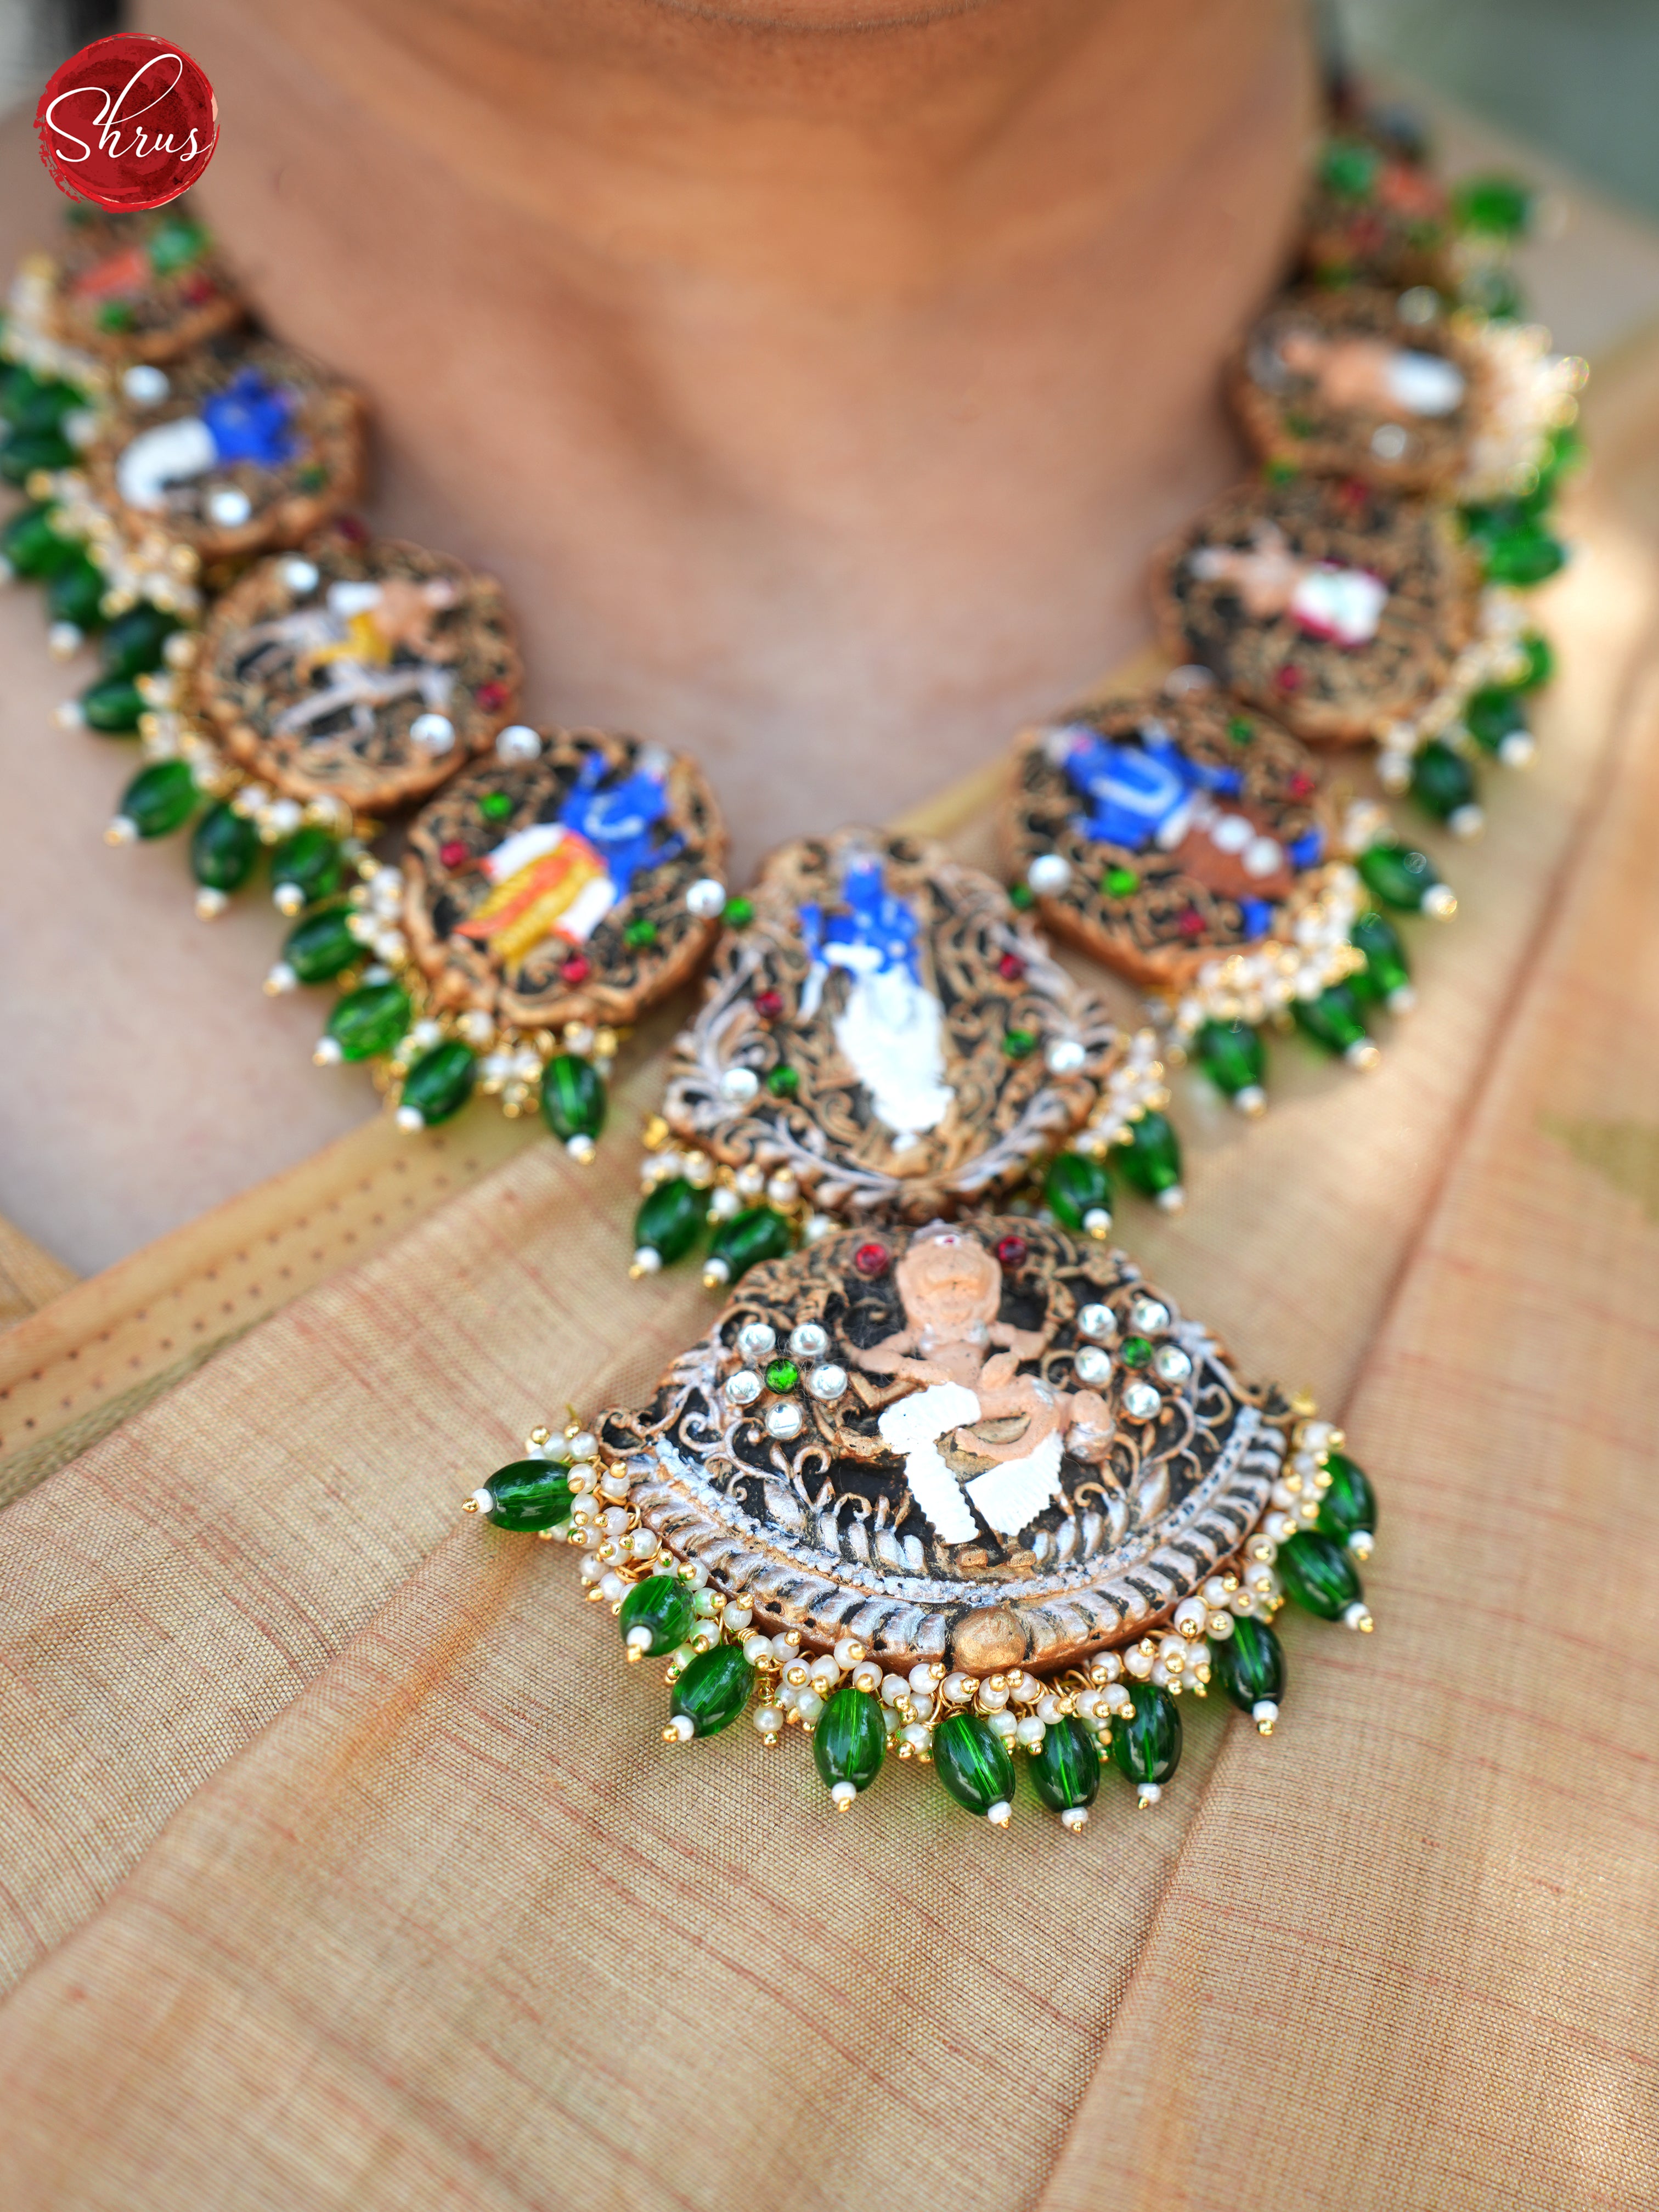 Dasaavathar Terracotta necklace with earring- Neck Piece & Earrings - Shop on ShrusEternity.com